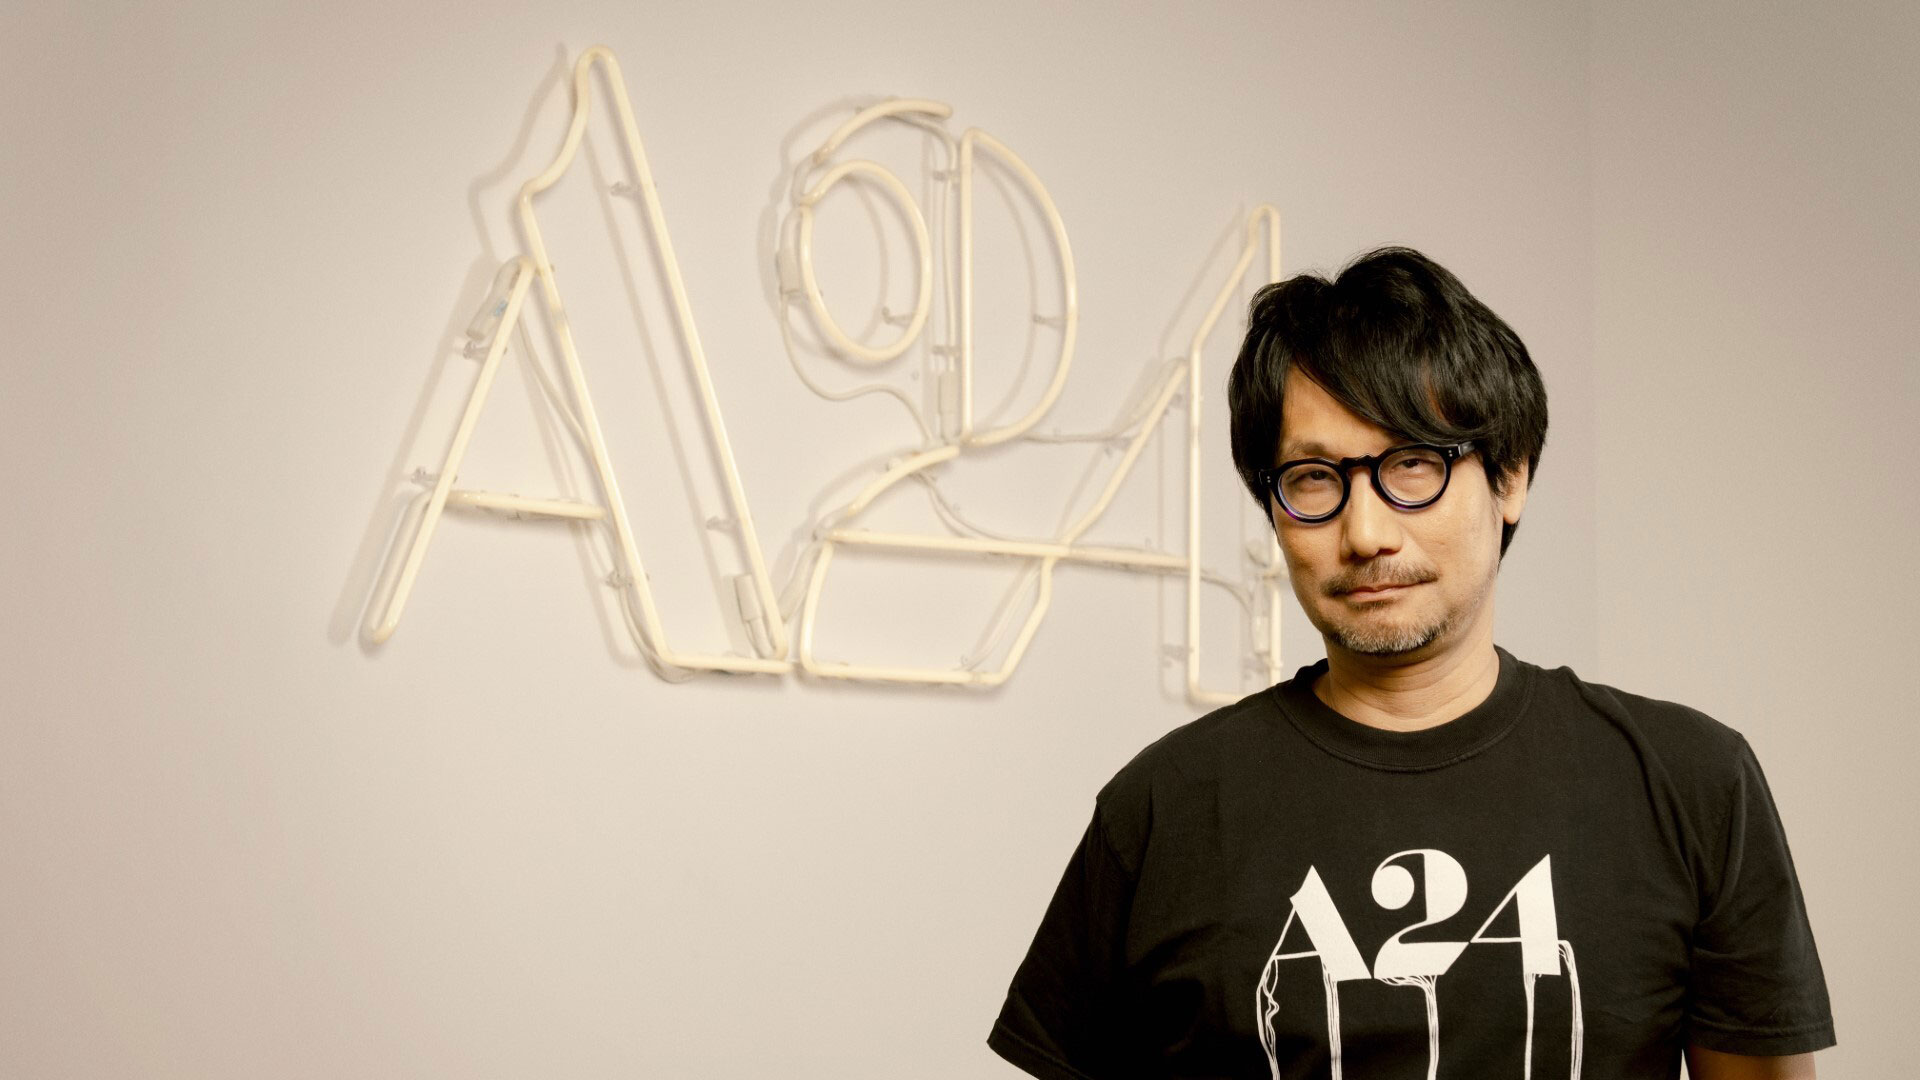 A24 has officially announced a movie adaptation of Hideo Kojima's Death Stranding